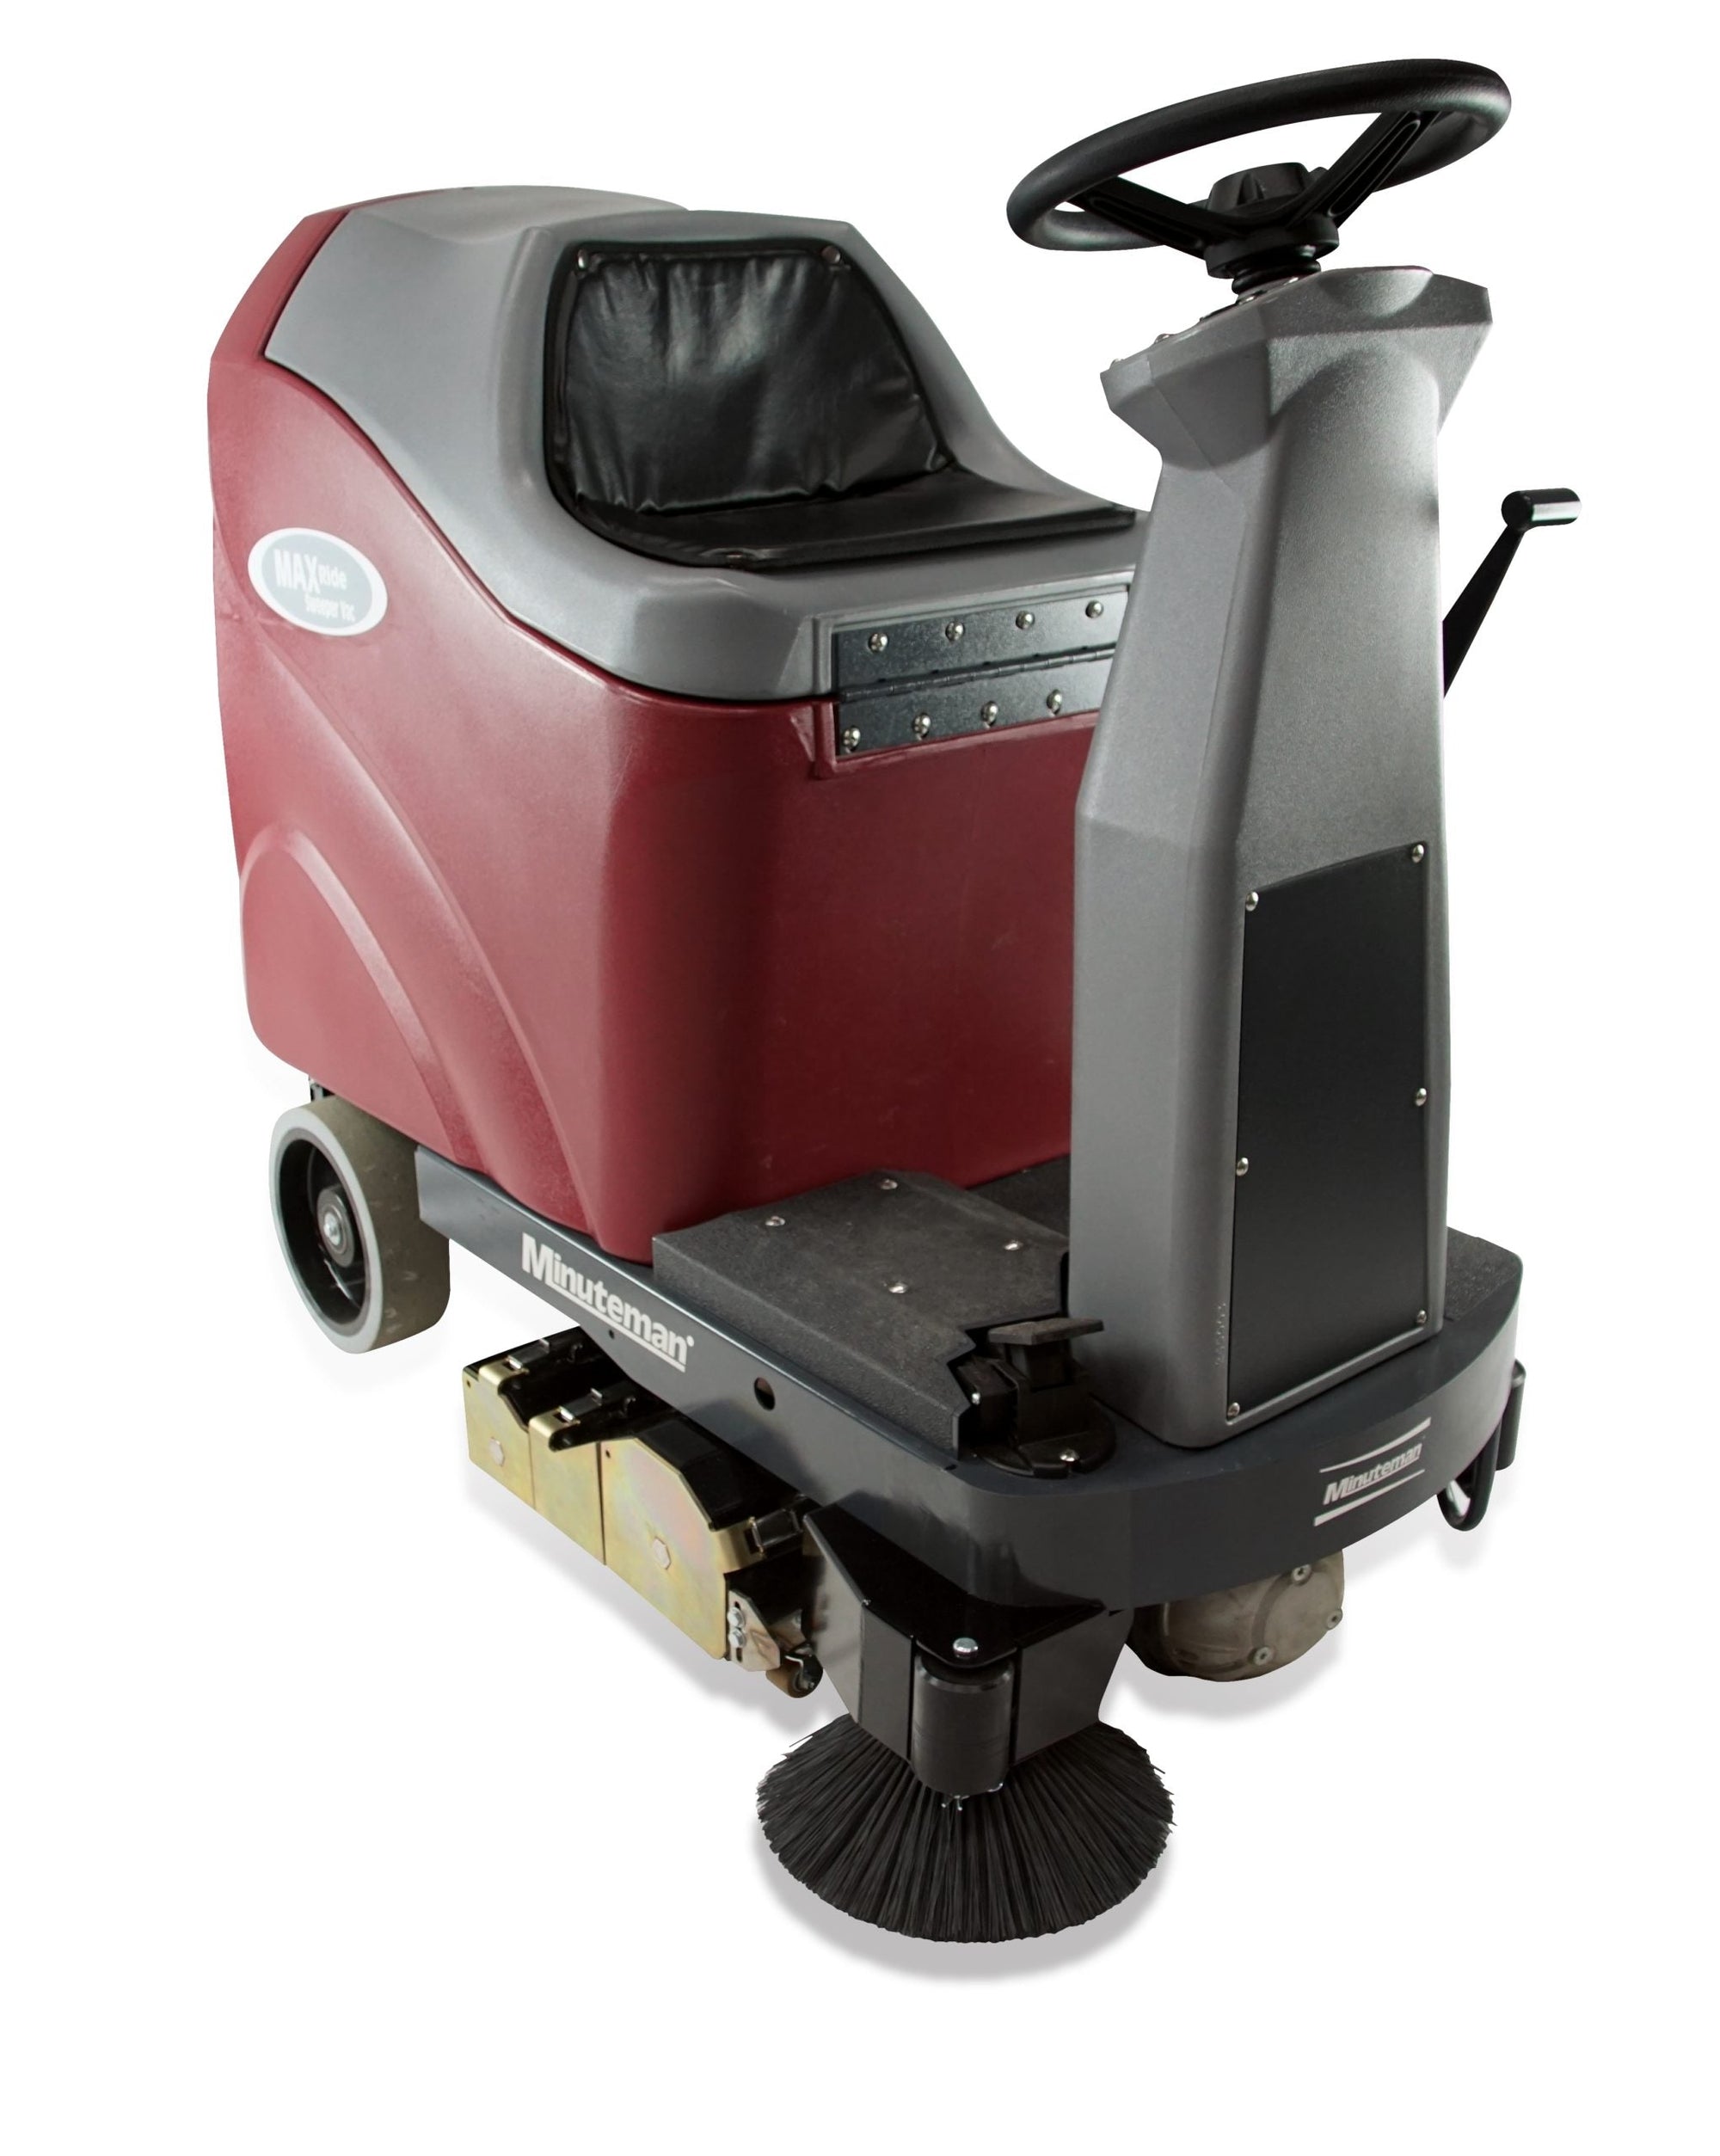 Minuteman Max Ride, Wide Area Vacuum, 20", Ride On, Battery, No Tools, Dual Counter Rotating Brushes